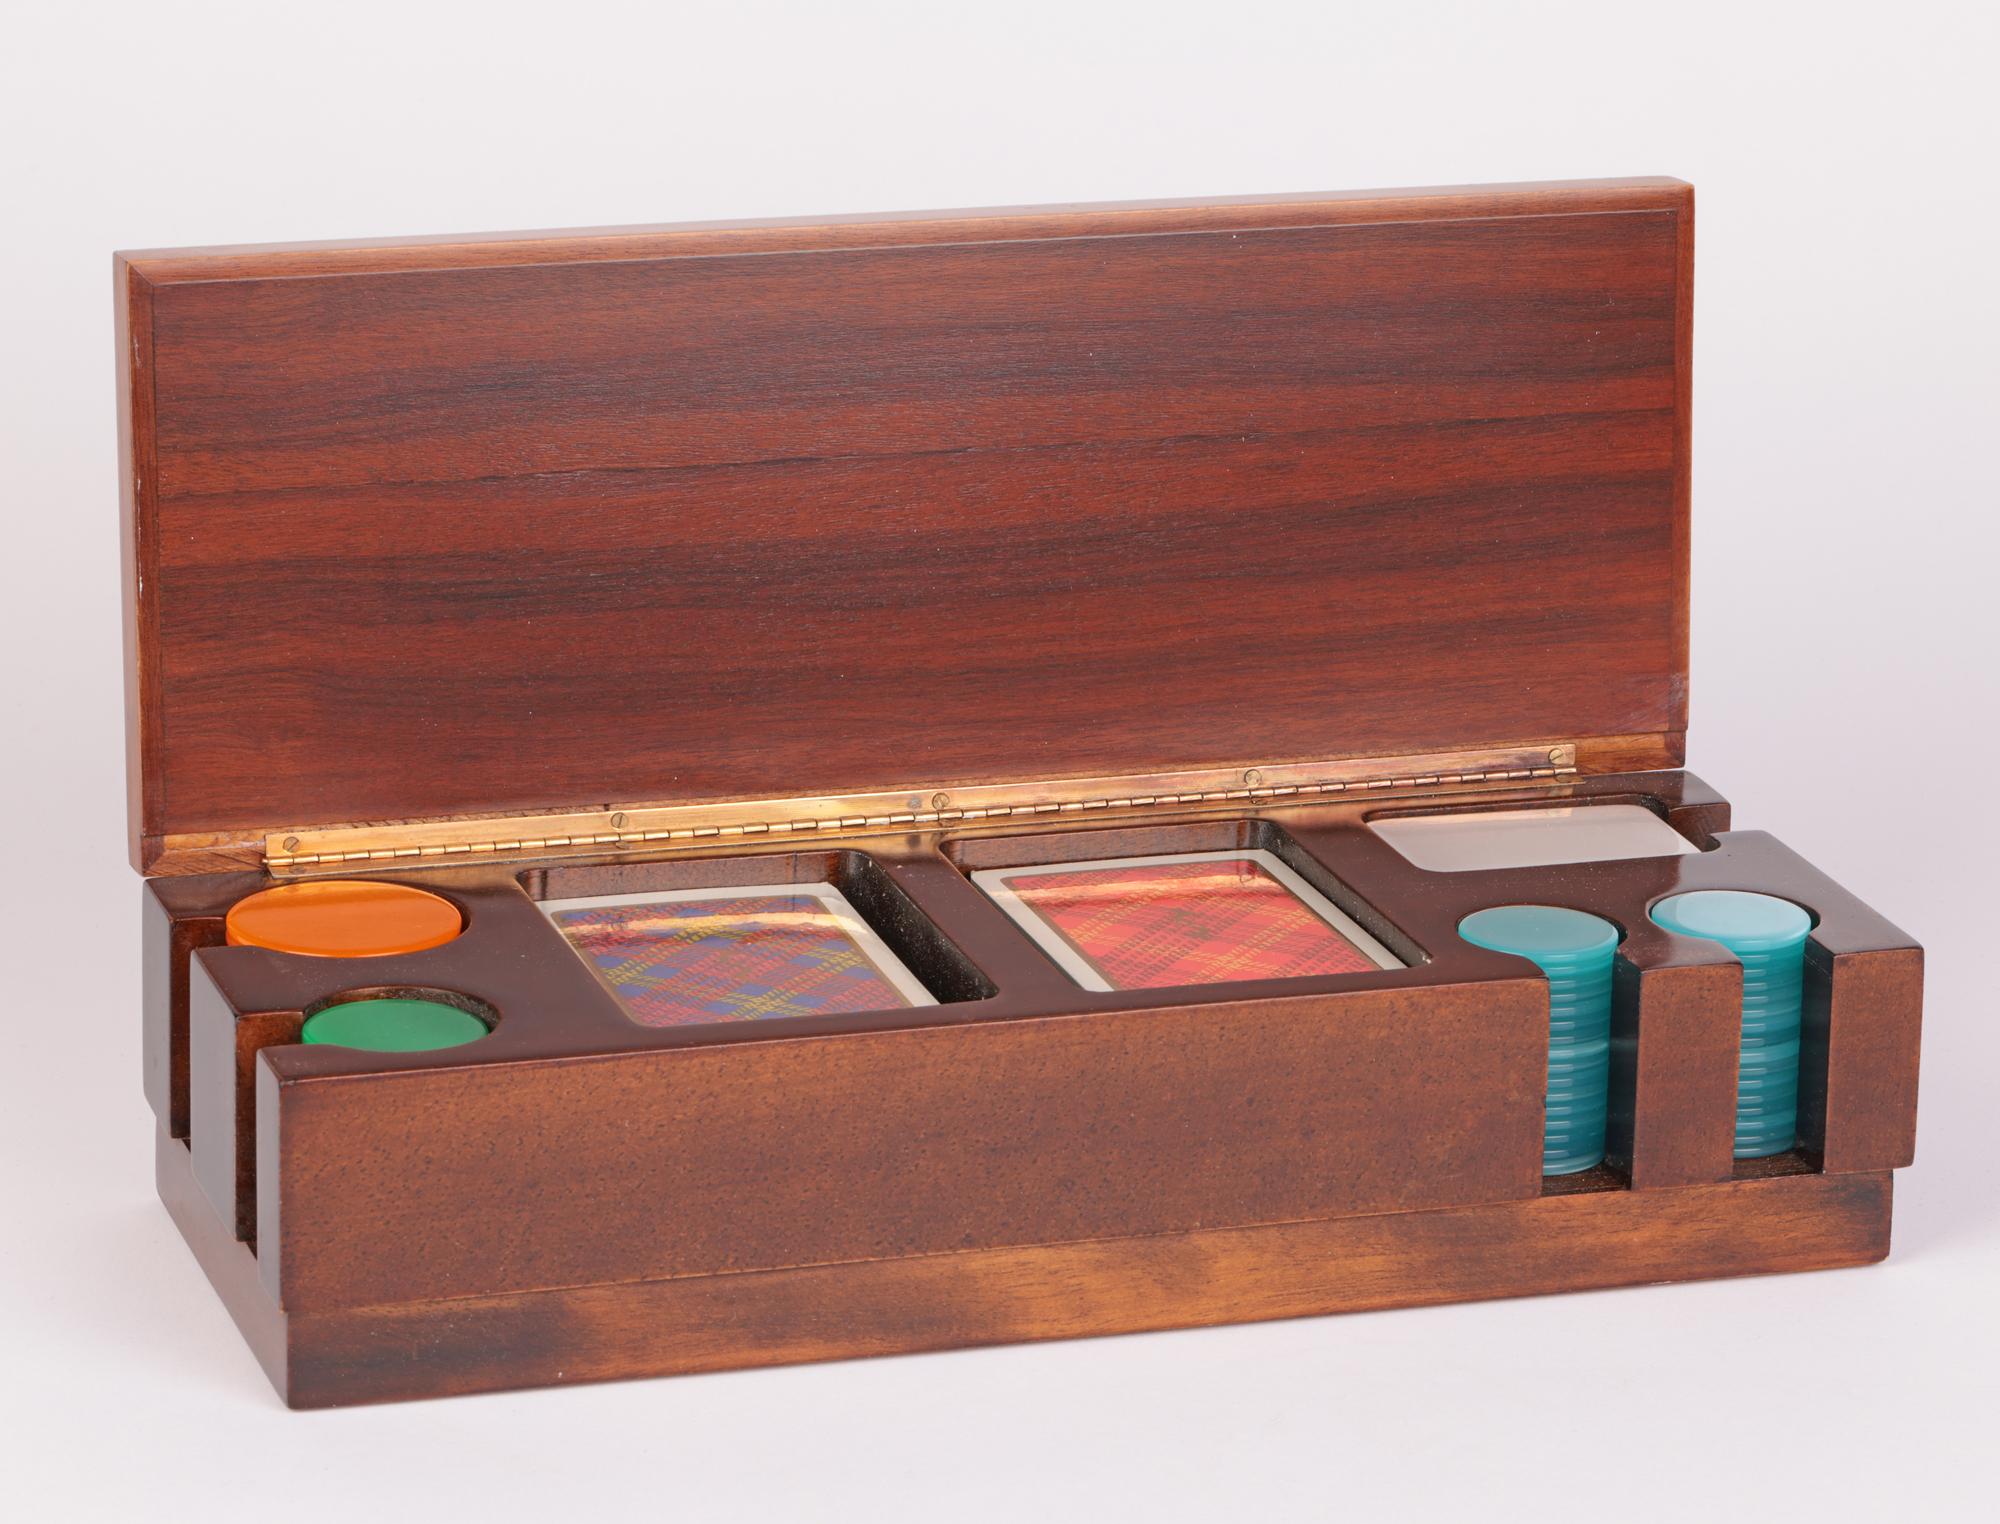 An exceptional quality mid-century Italian wooden games box attributed to Cambissa & Co. The box is constructed from two different colored woods assembled in three sections. The body of the box made in a slightly darker wood comprises of five